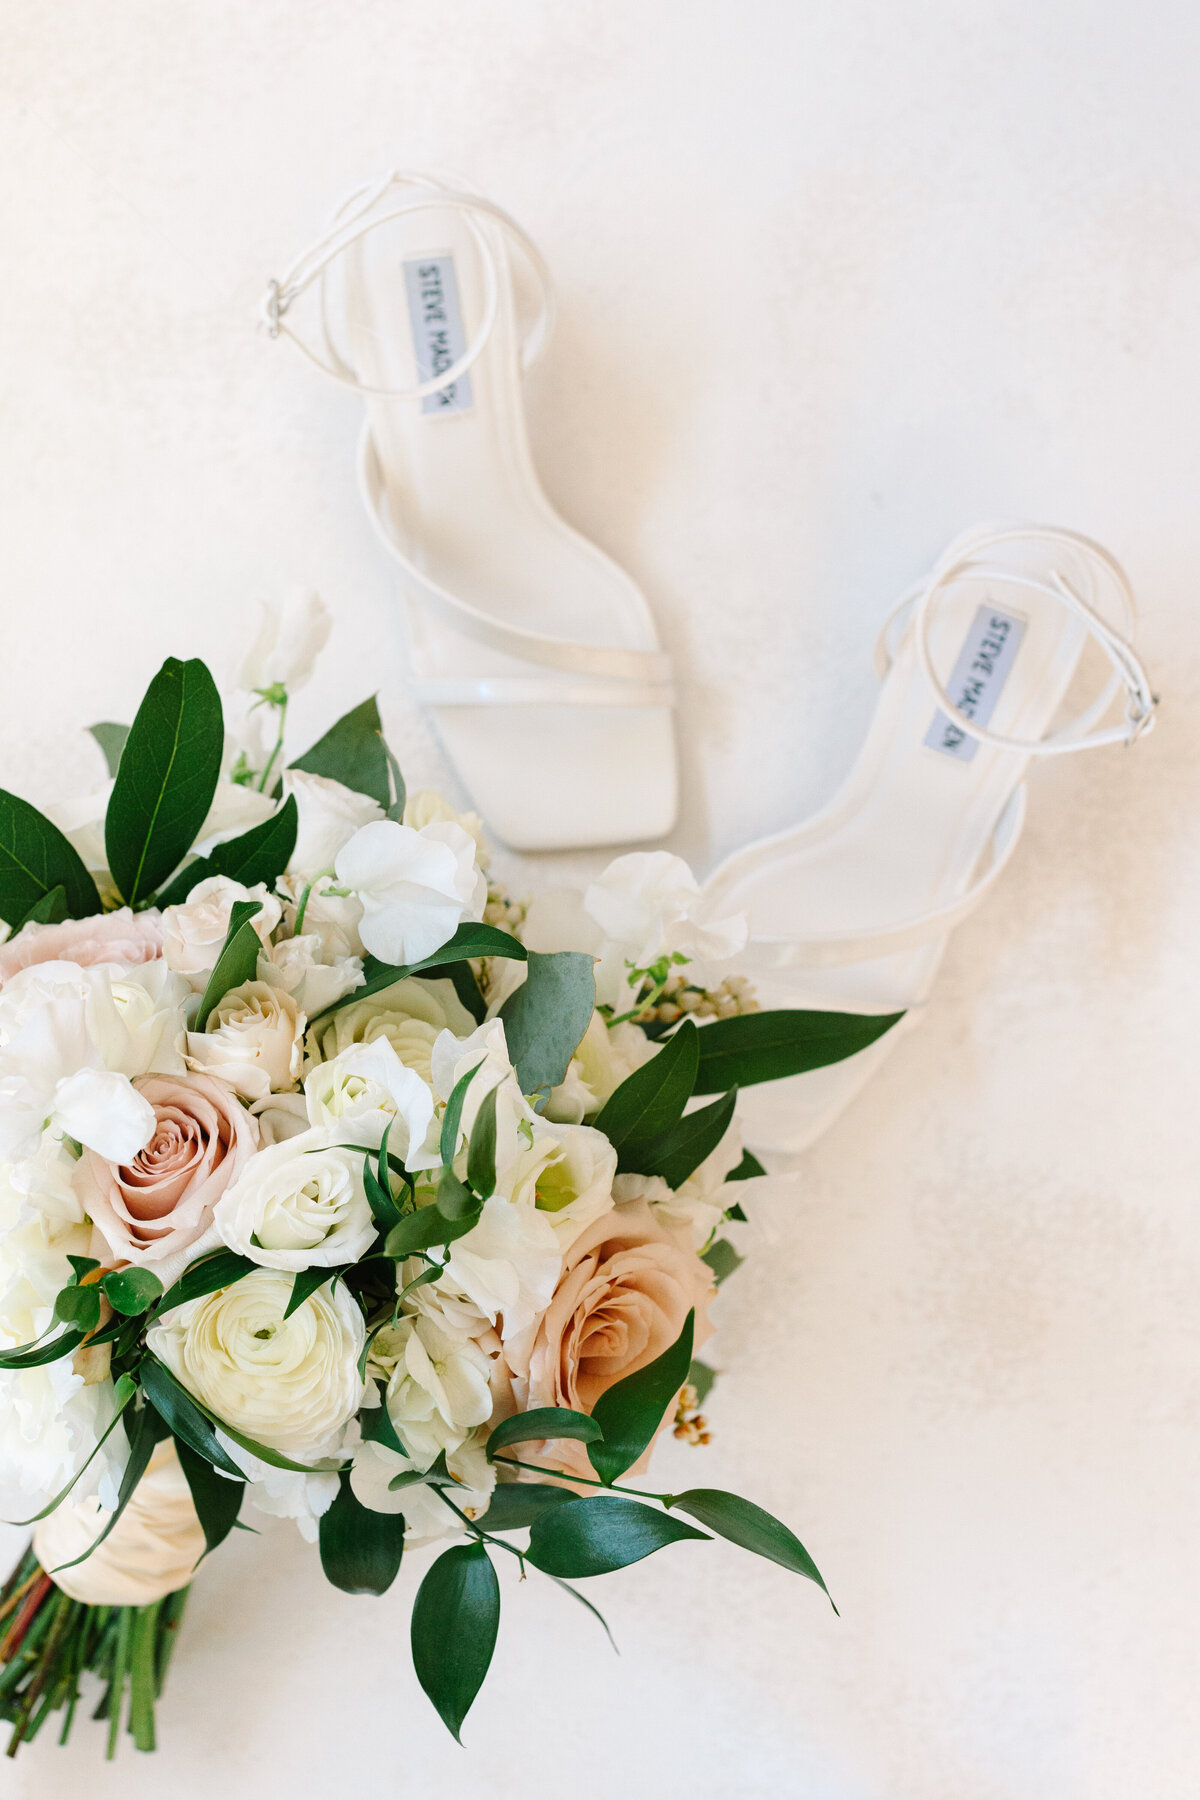 bride's shoes with a white, soft pink, and loose greenery wedding bouquet.